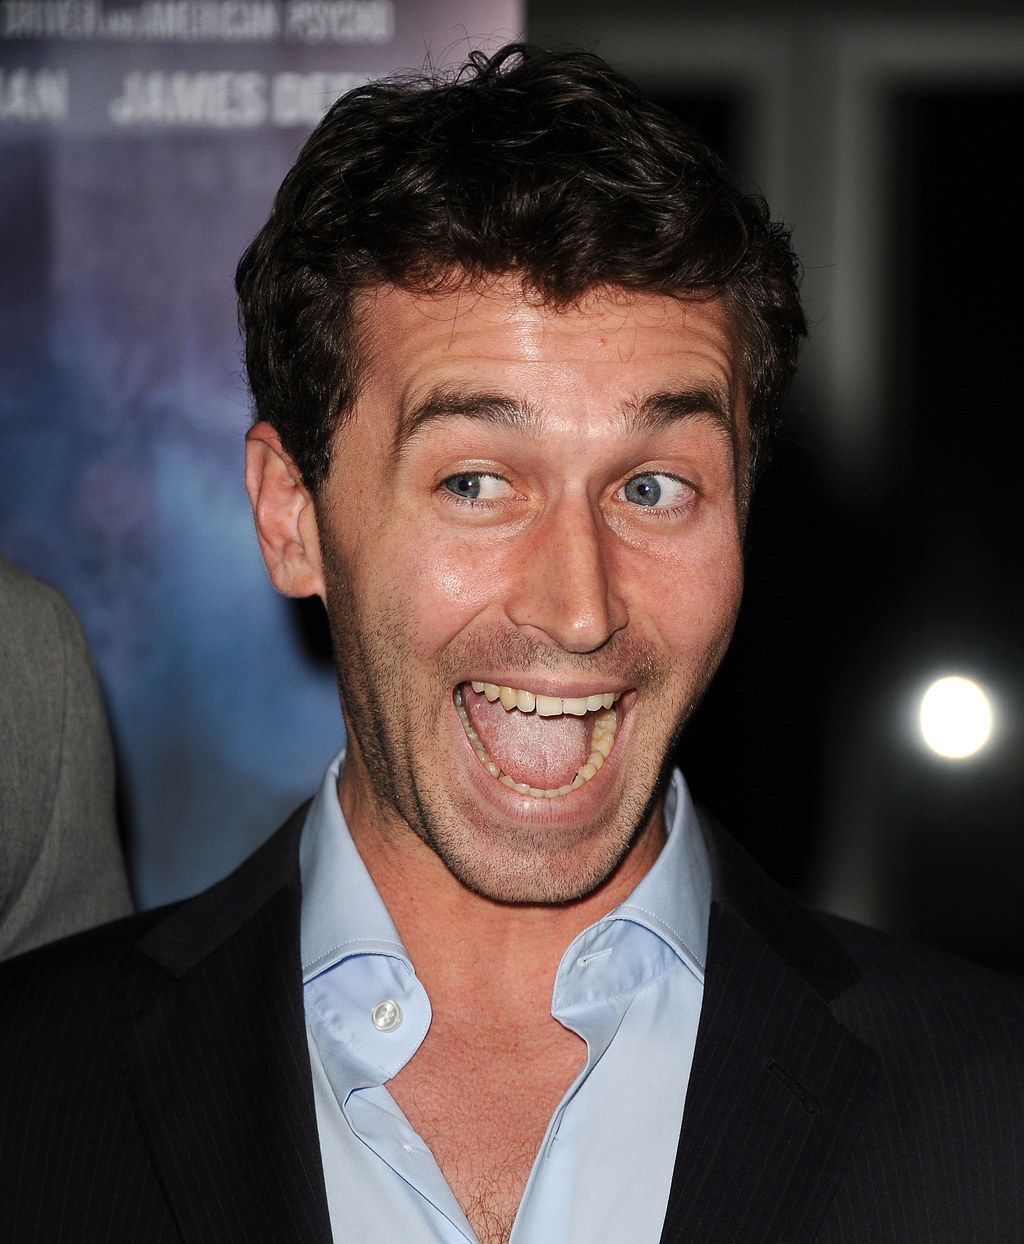 Jamees Deen - 15 Things You Might Not Know About Porn Star James Deen